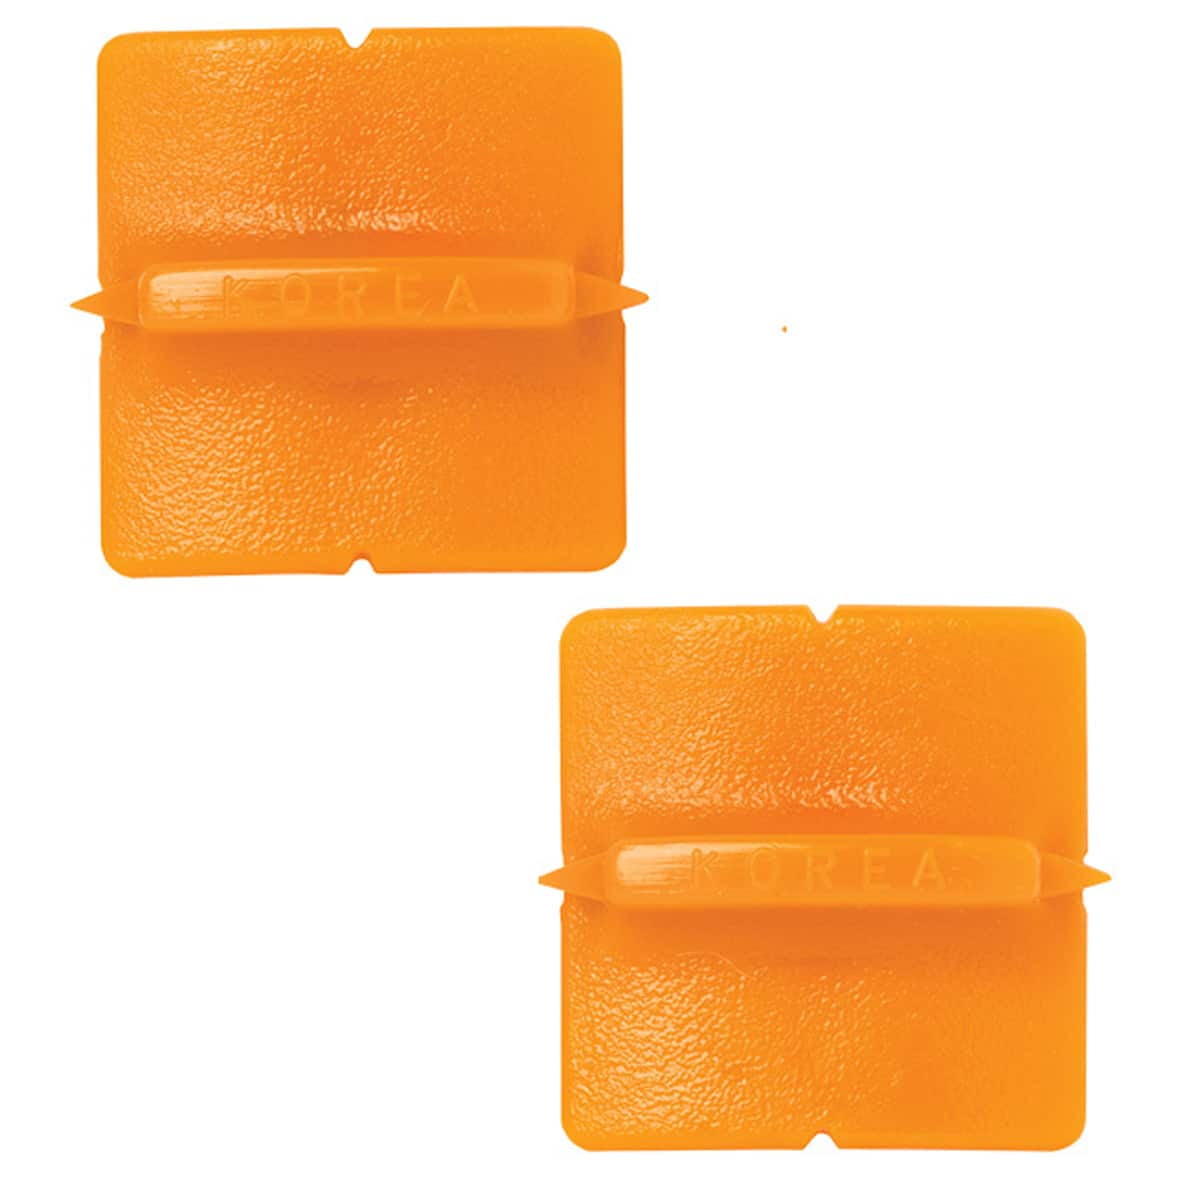 Fiskars Paper Cutter Replacement Blades - 2-Pack - Style G for 9 and 12  Paper Trimmer - Orange